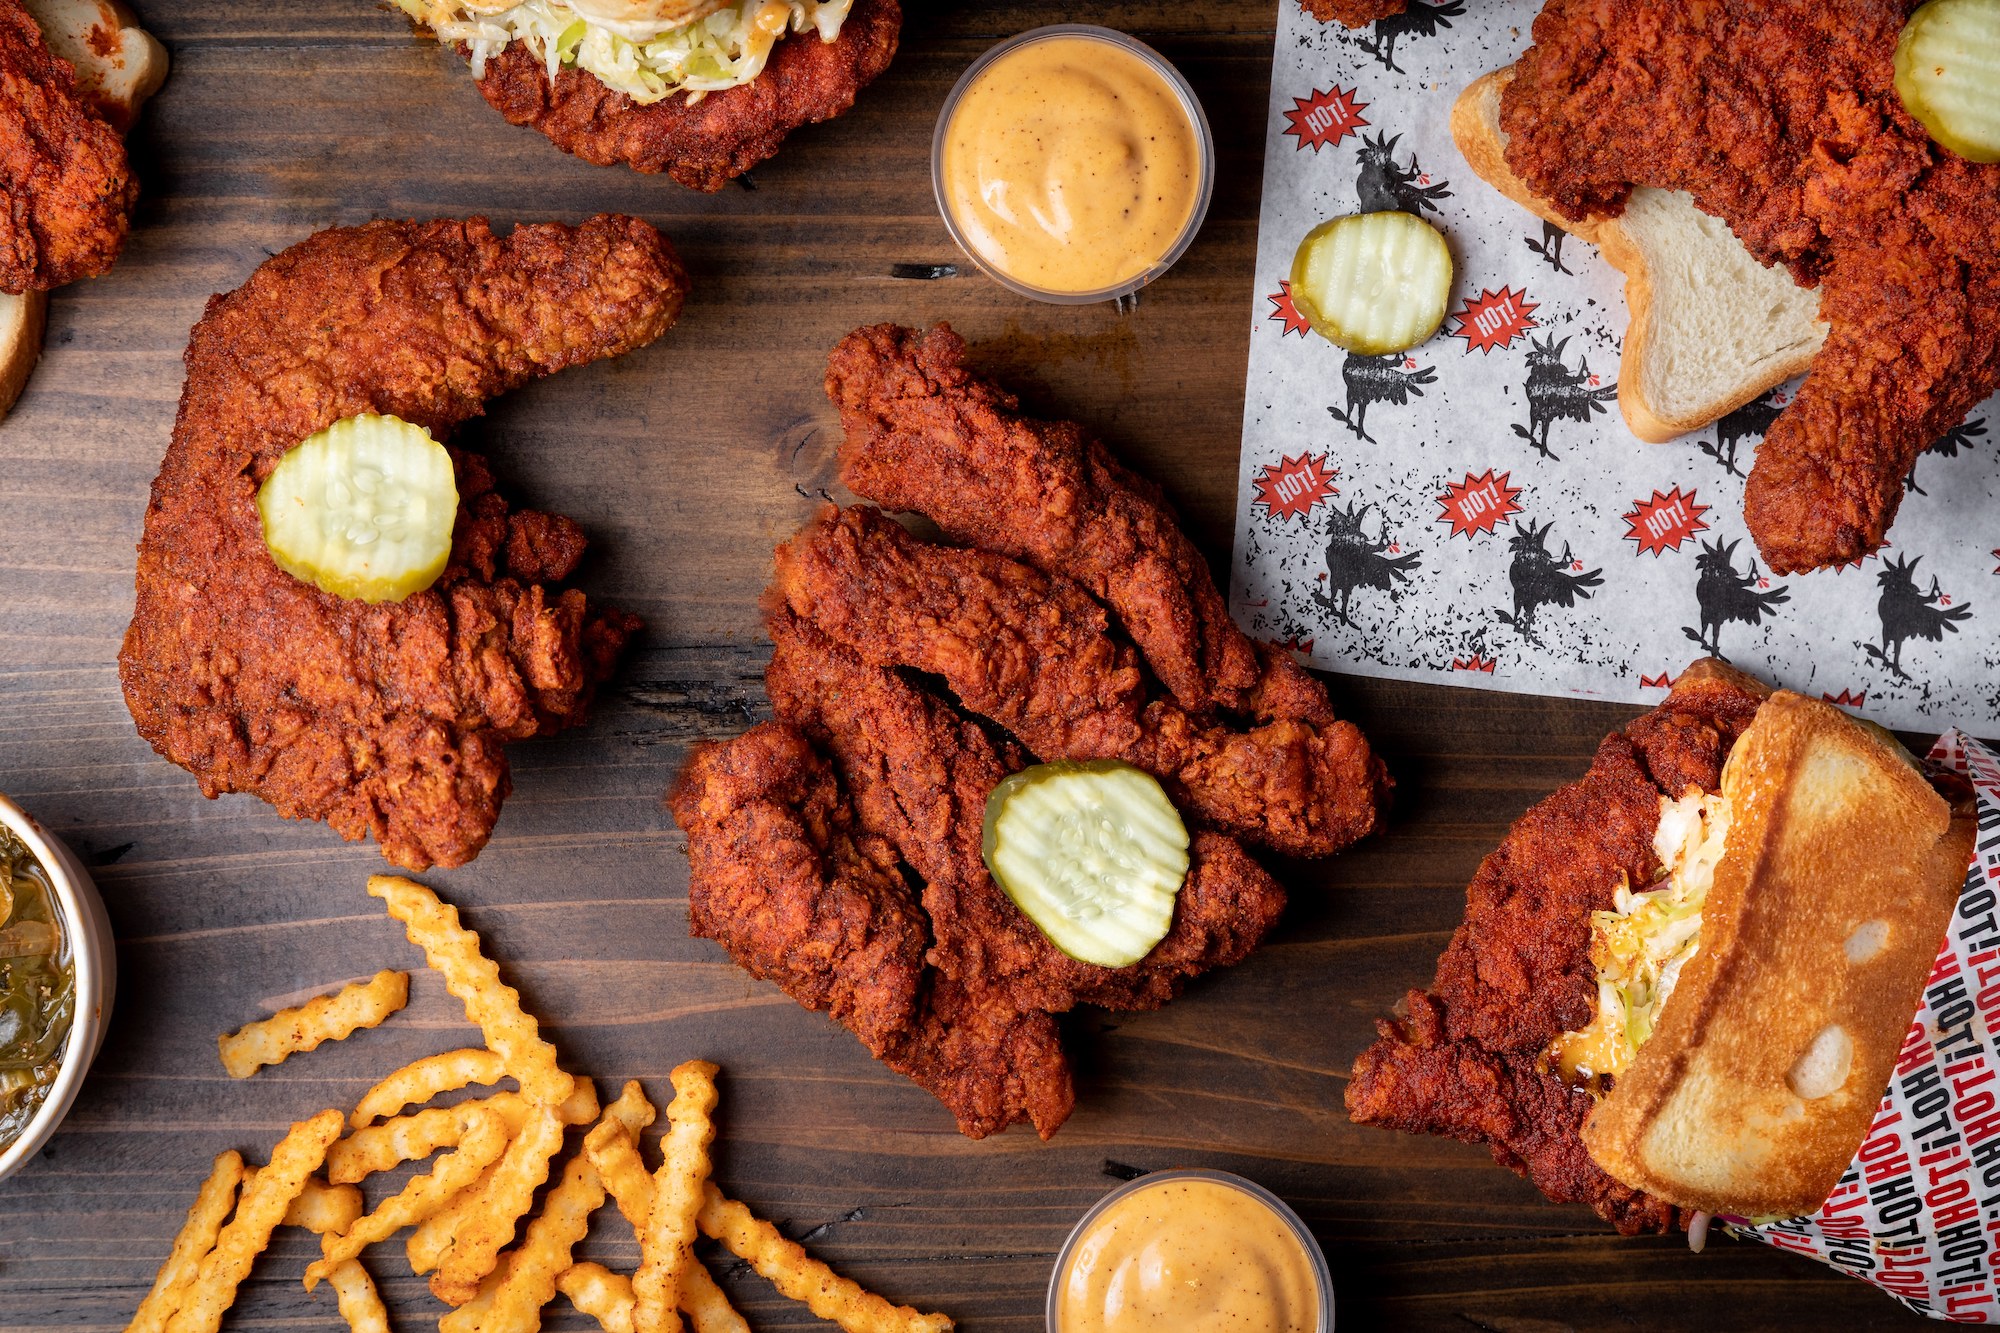 A spread out collection of hot chicken, fries, and sauces from Howlin’ Ray’s.